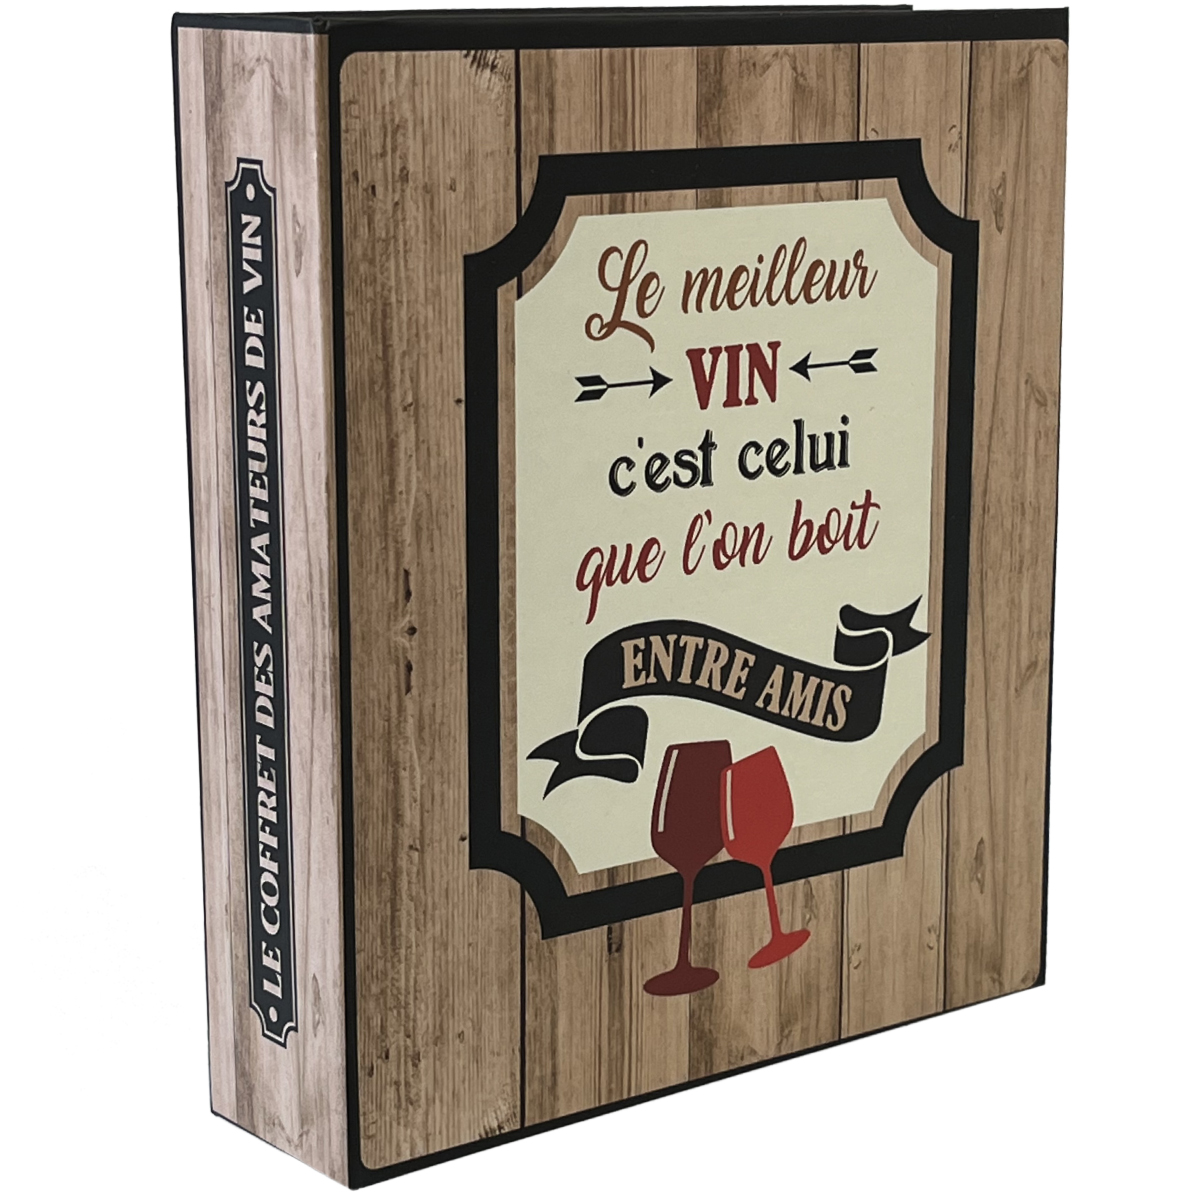 Small sommelier box in the shape of a book